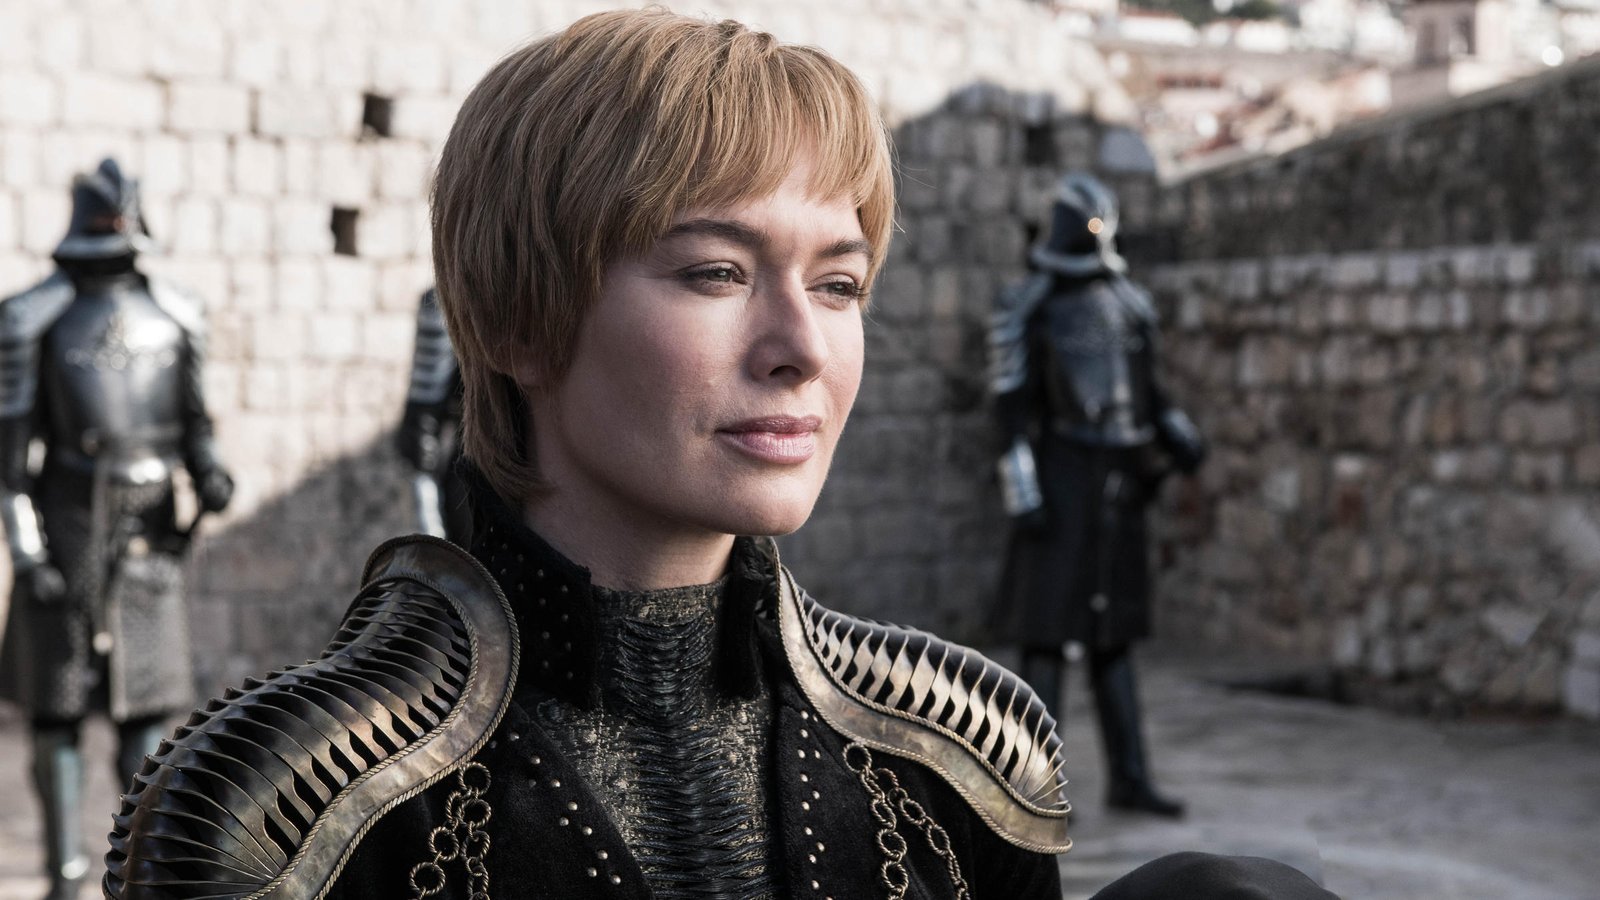 Queen Cersei (Lena Headey) smiling that smile of hers on Game of Thrones. Shoulder pads courtesy Julia Sugarbaker.